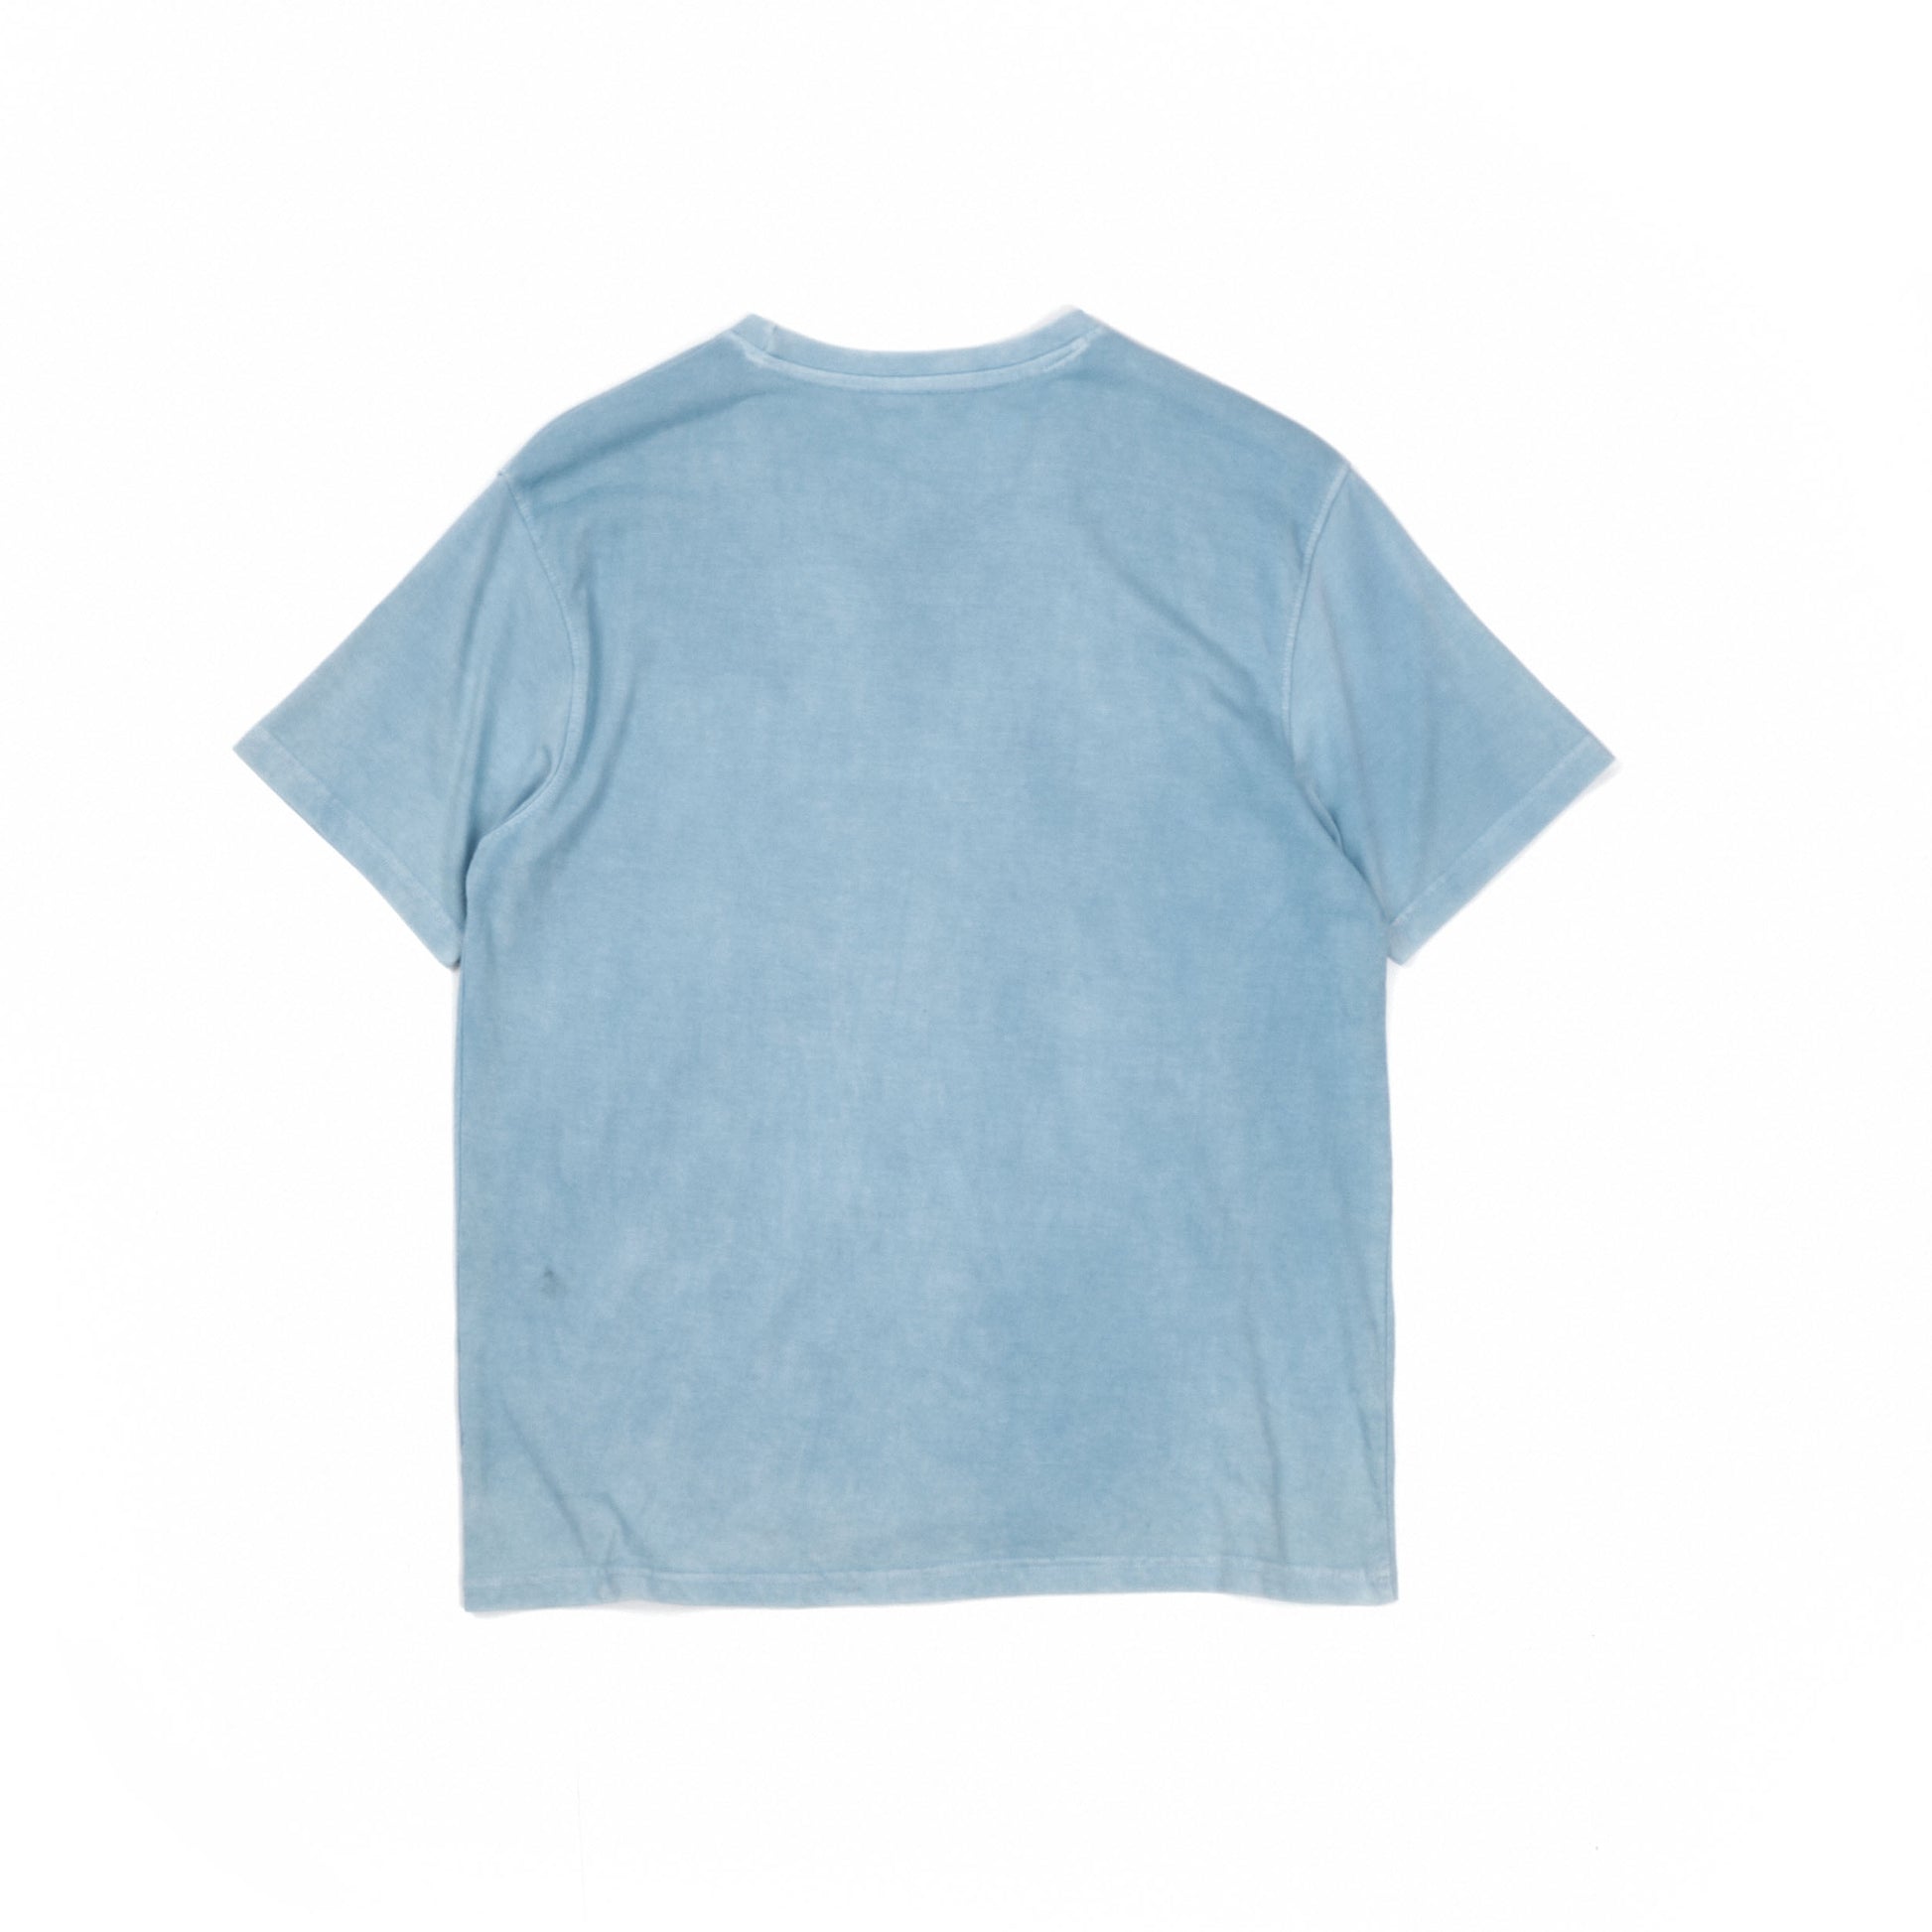 Relaxed fit organic cotton t-shirt dyed with natural indigo in ice blue colour